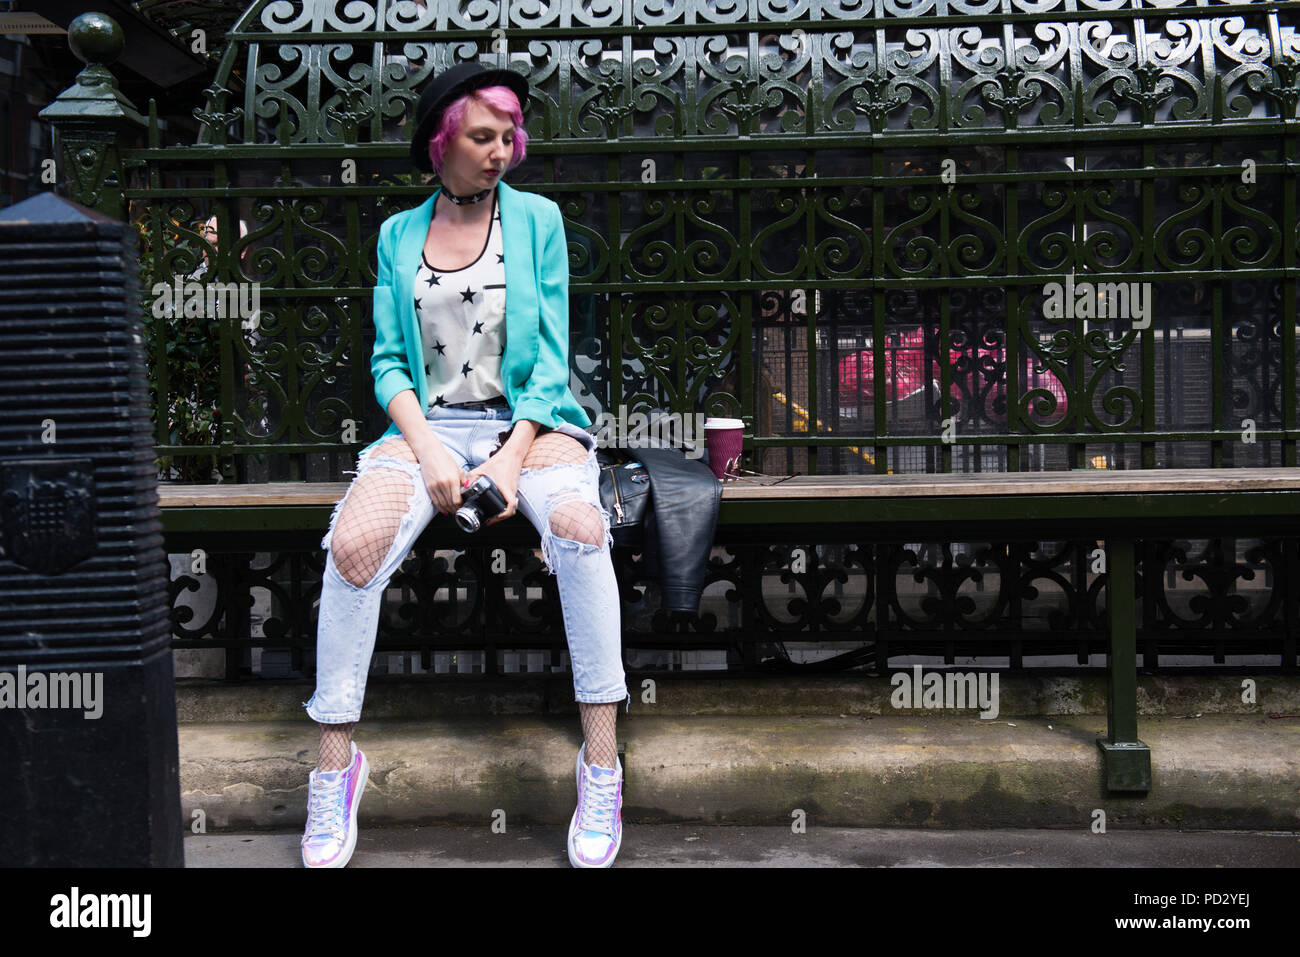 Young woman with pink hair and quirky style sitting on bench, London, UK Stock Photo